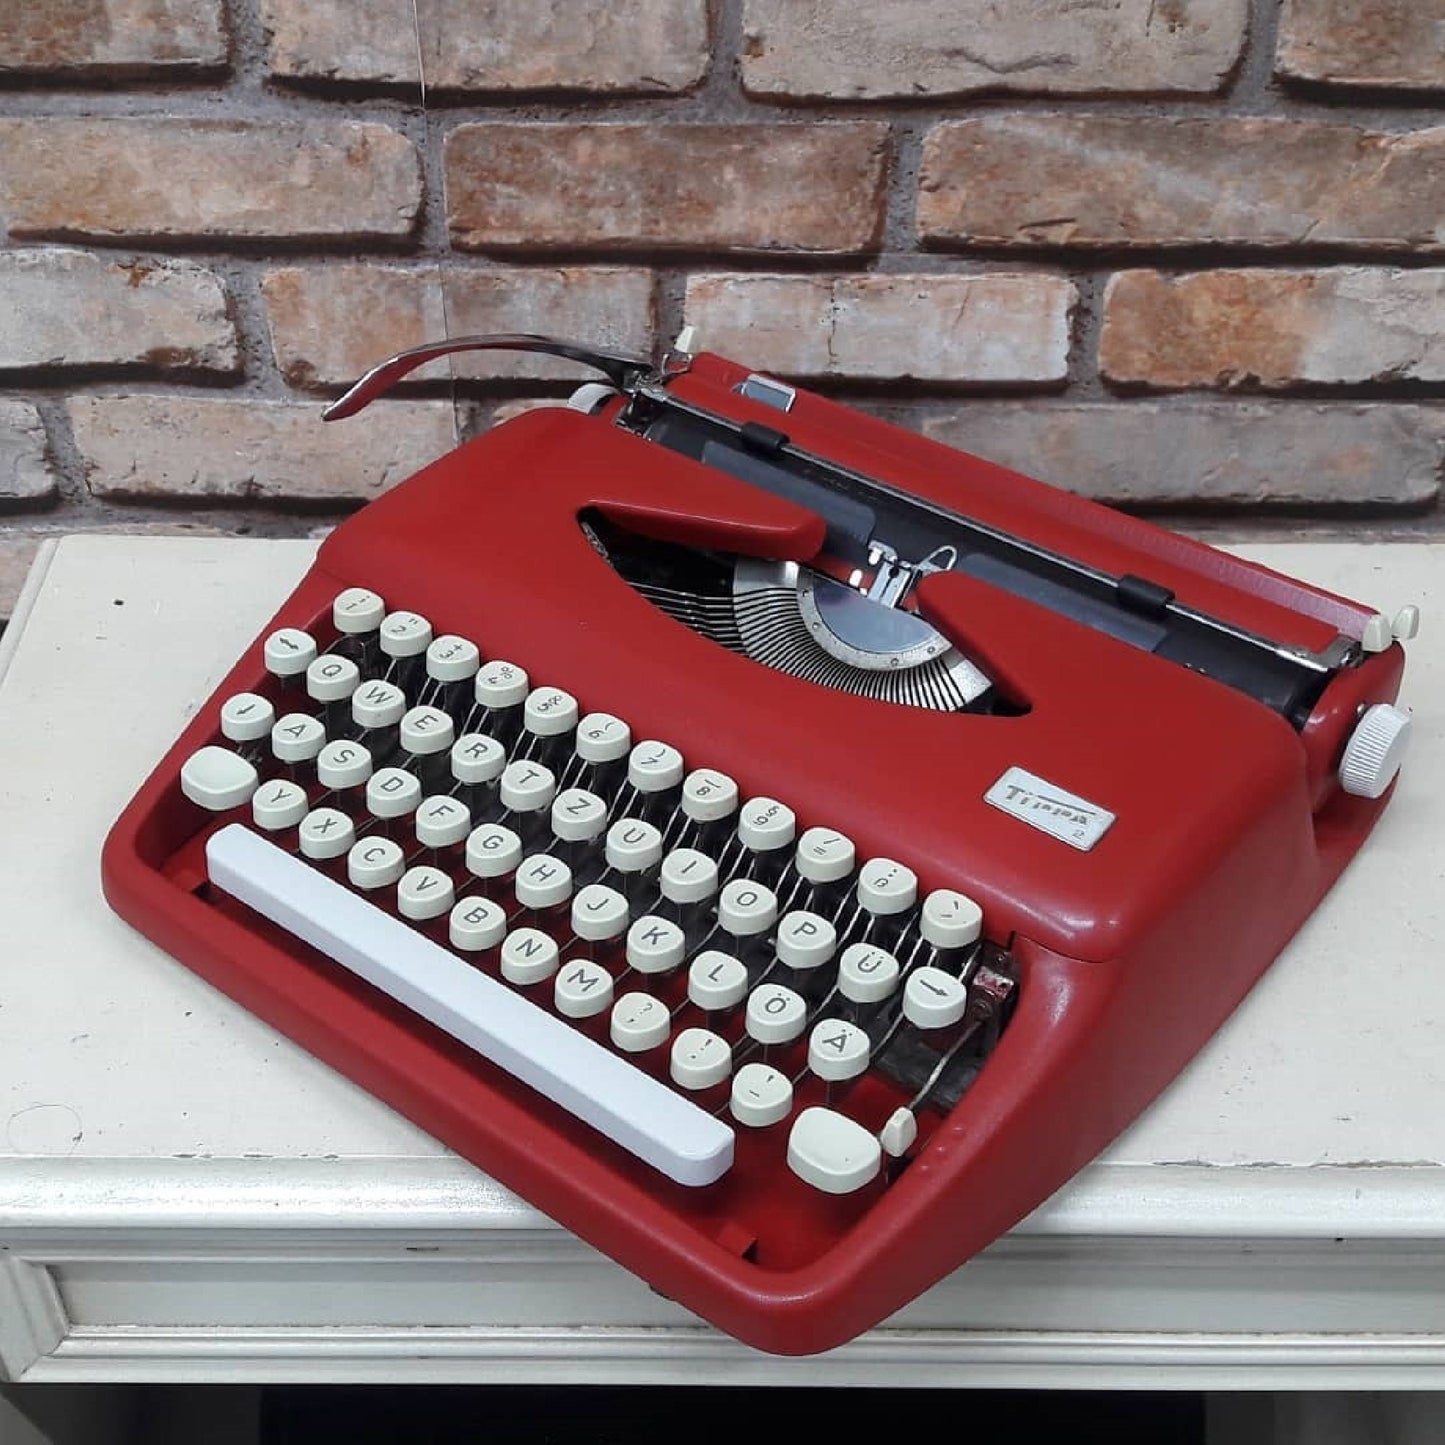 Adler Tippa Red Typewriter | Antique Charm, Fully Operational | Ideal Gift for Vintage Enthusiasts | Elevate Your Writing Experience